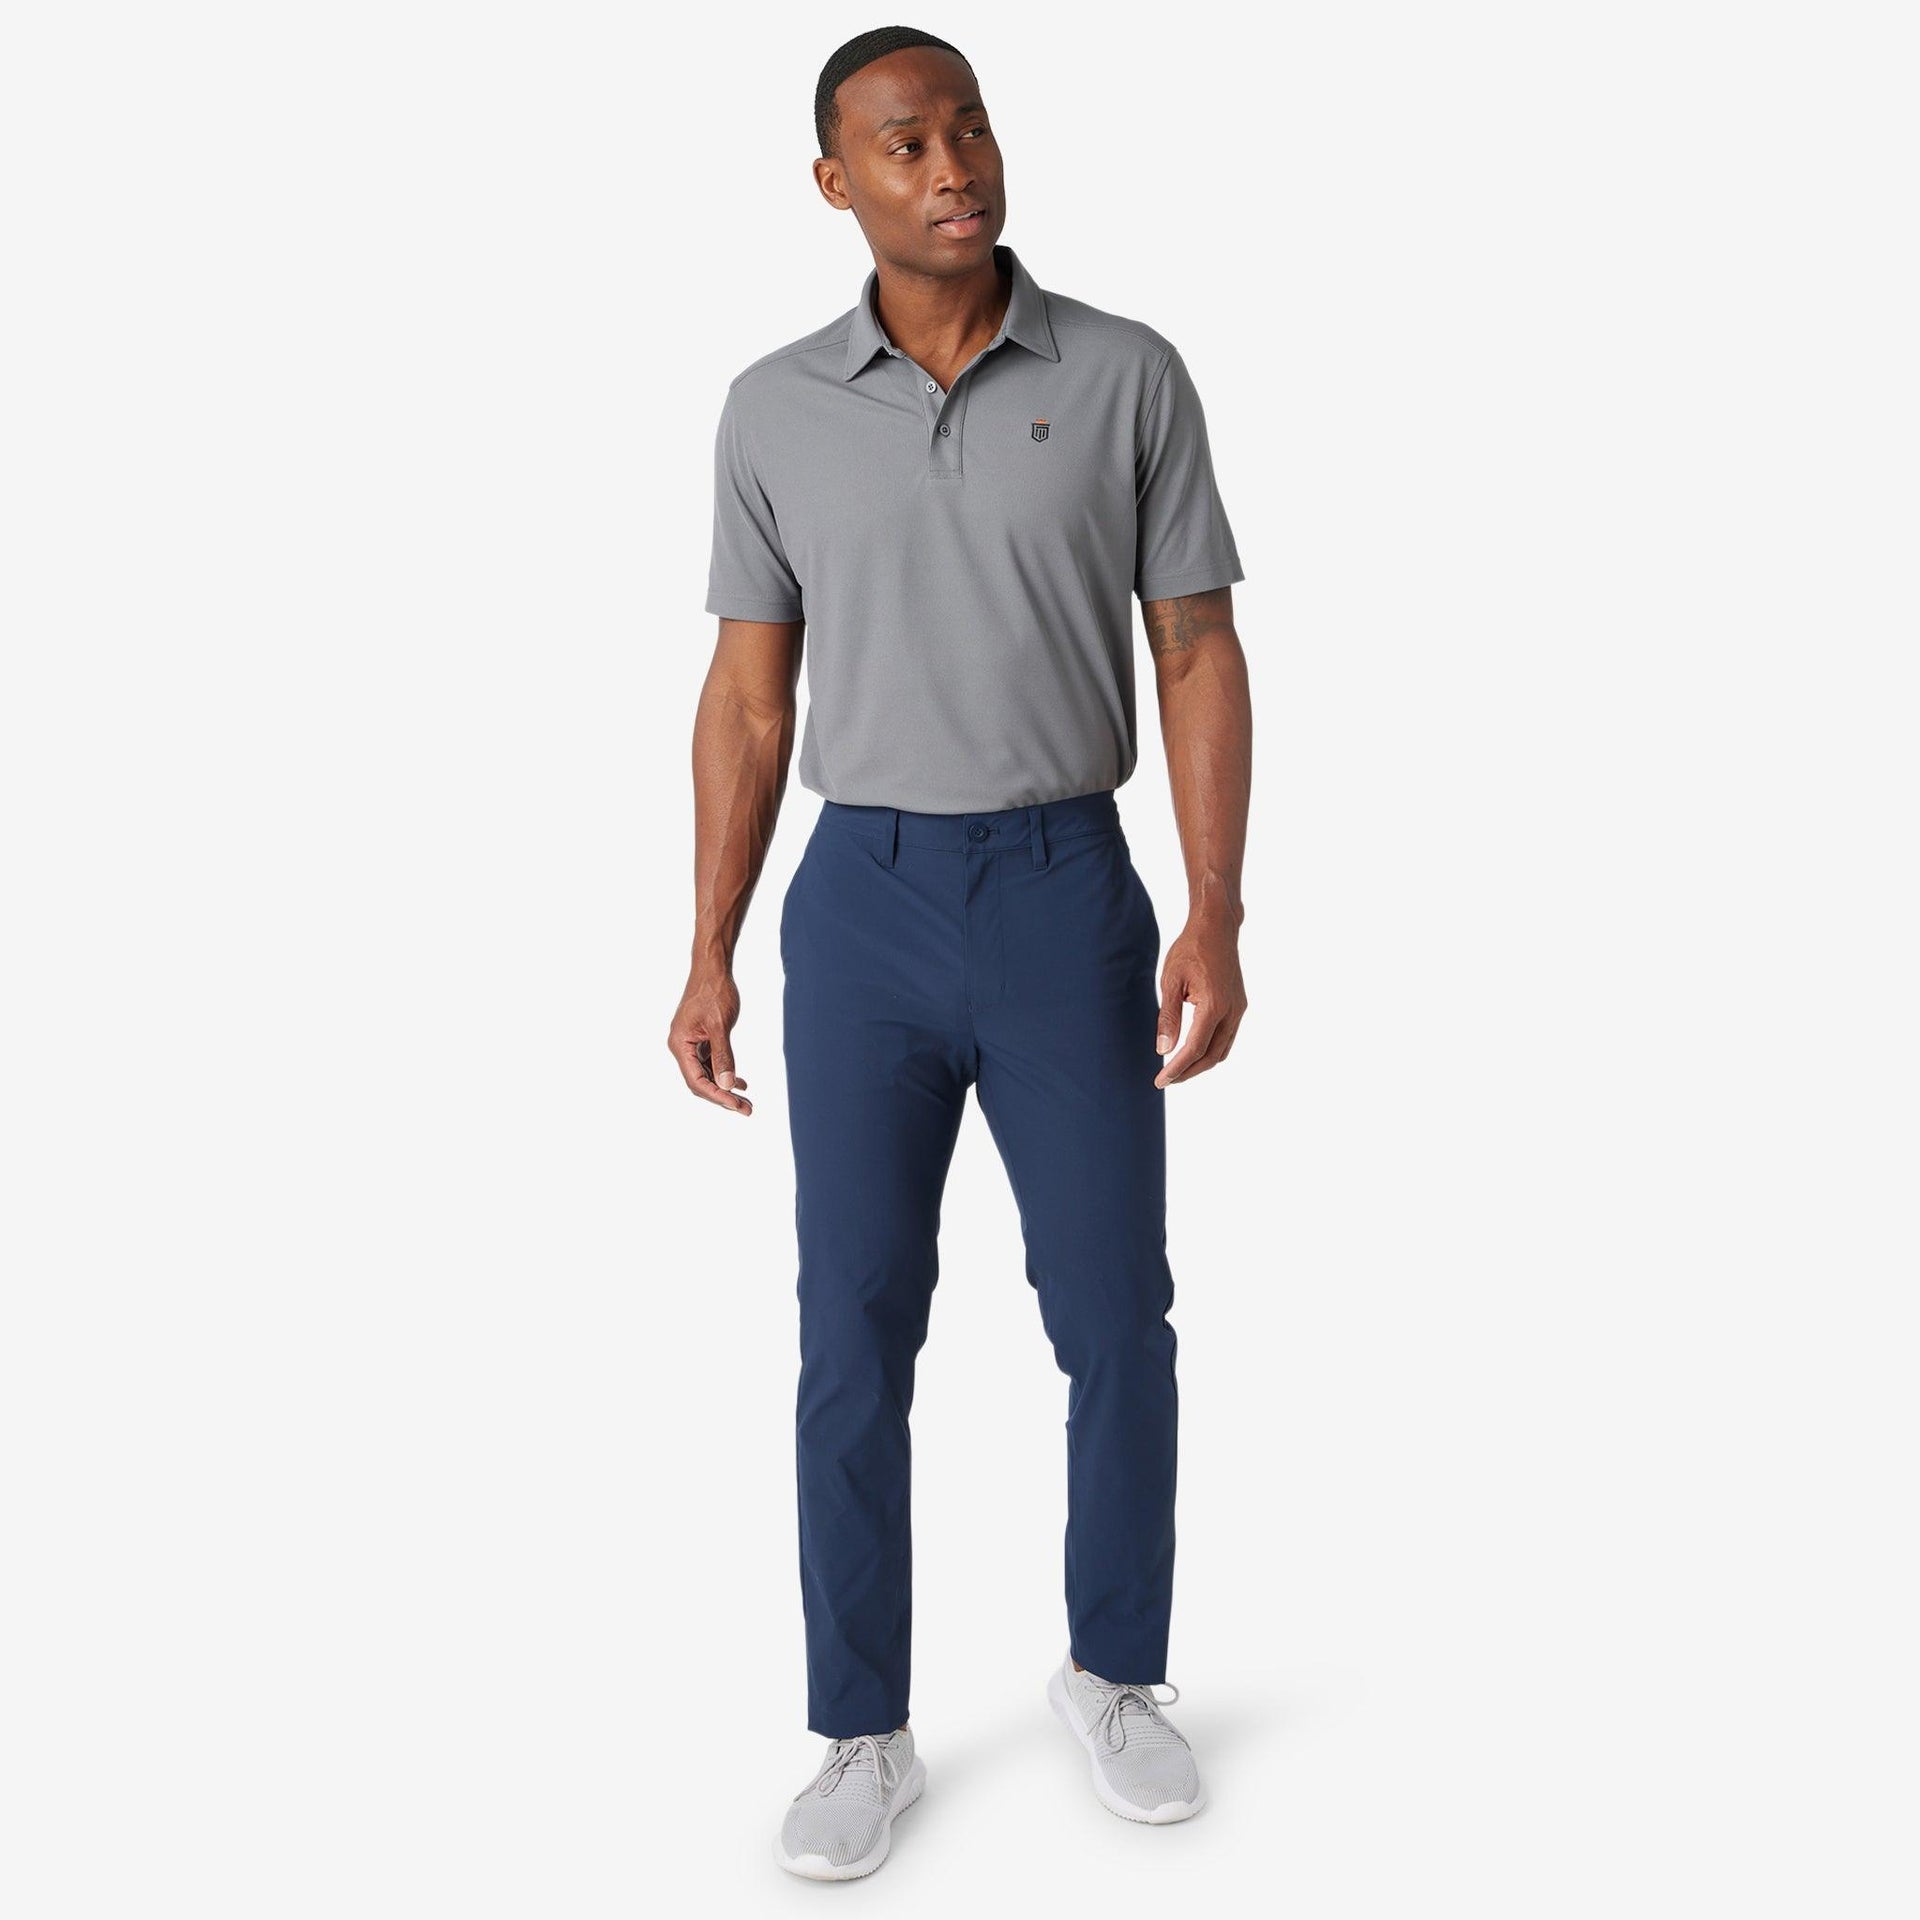 clubhouse pant Navy 32x32